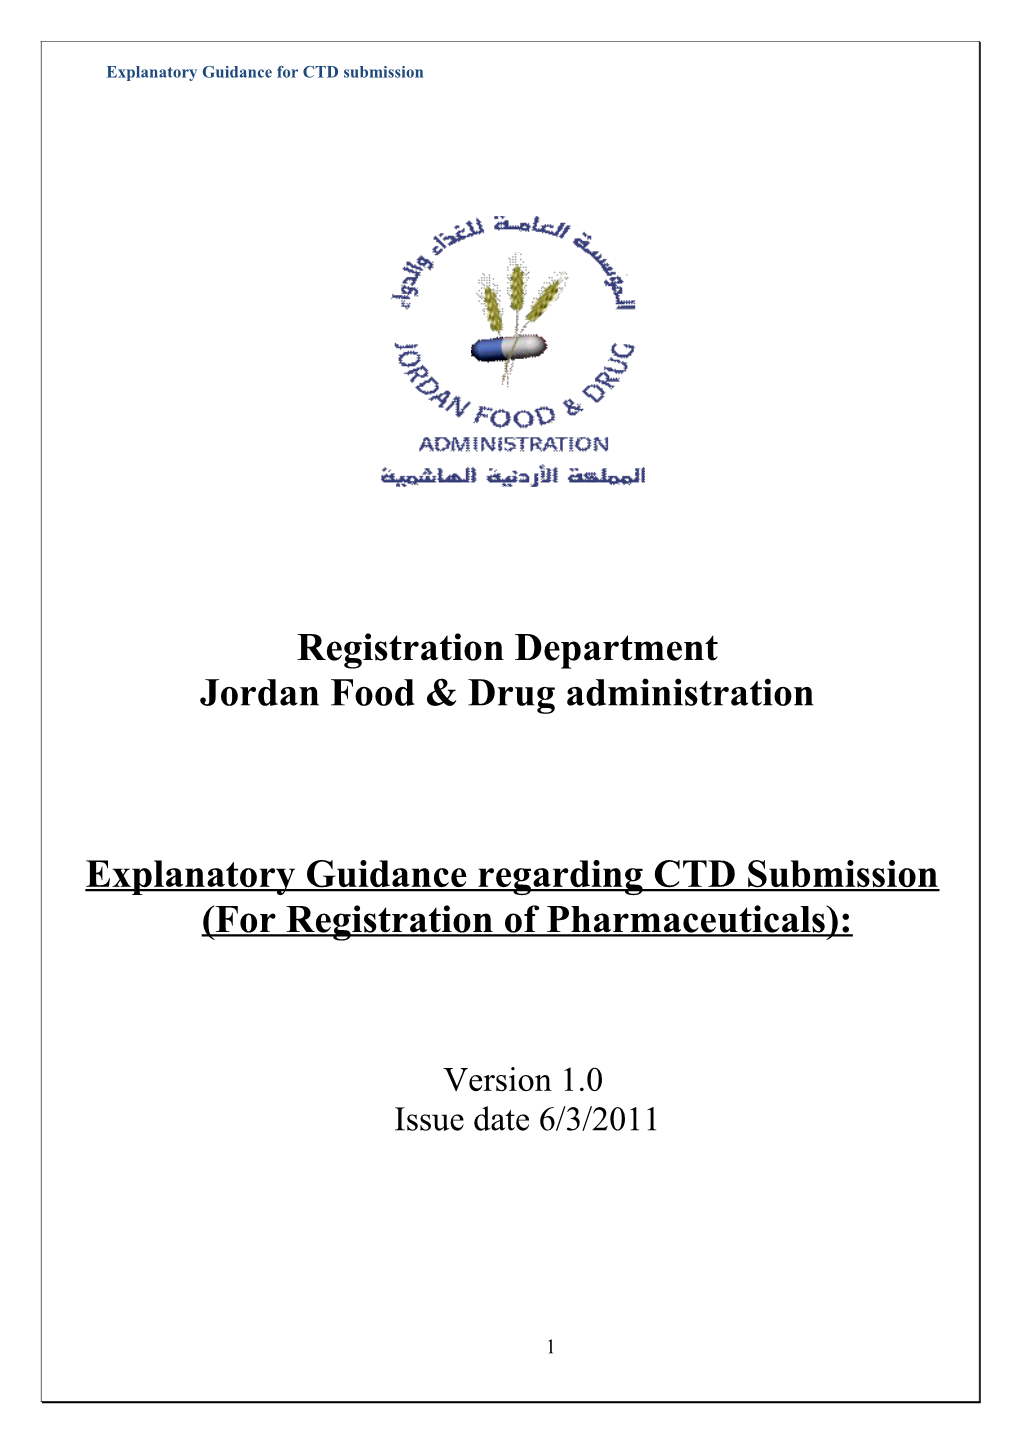 Explanatory Guidance for CTD Submission